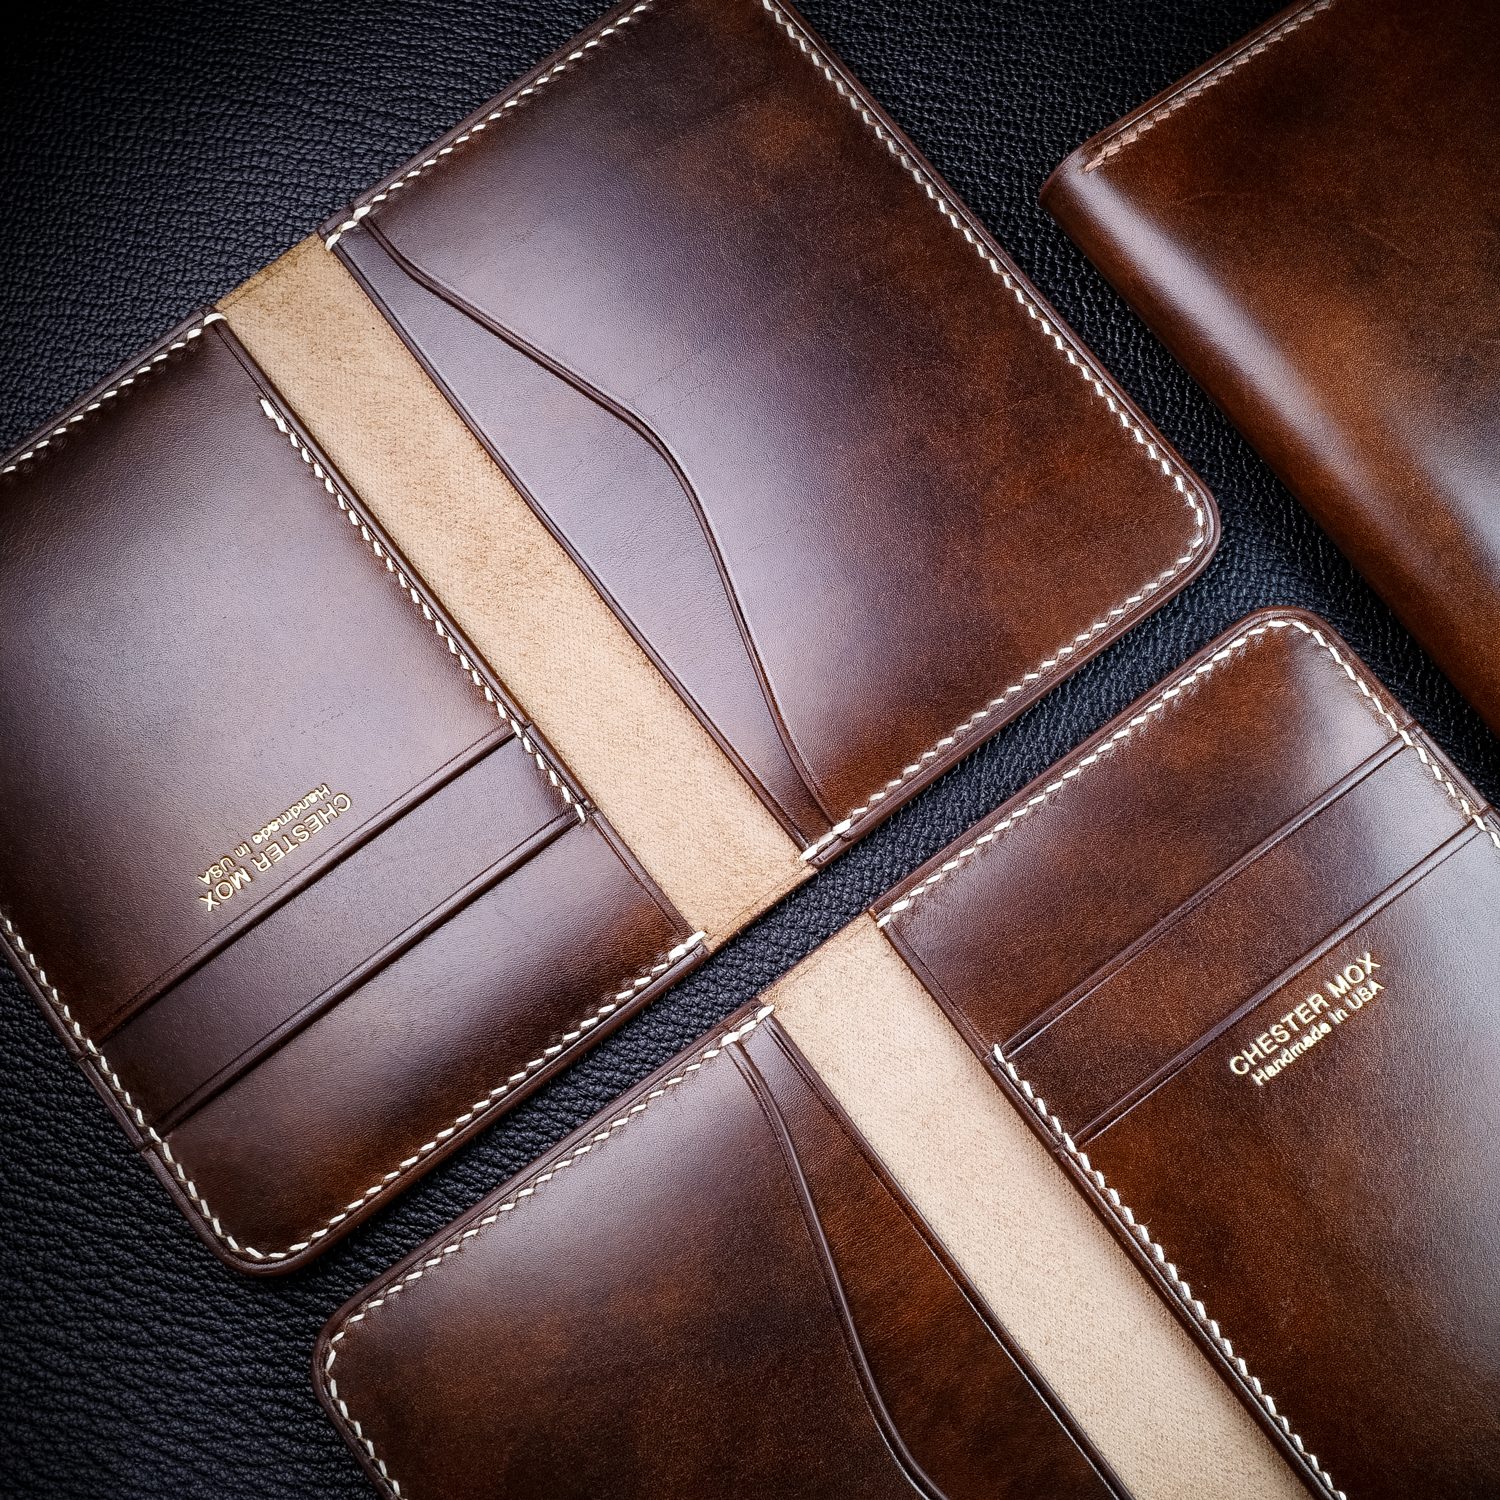 Custom Leather Goods on Sale at Chester Mox